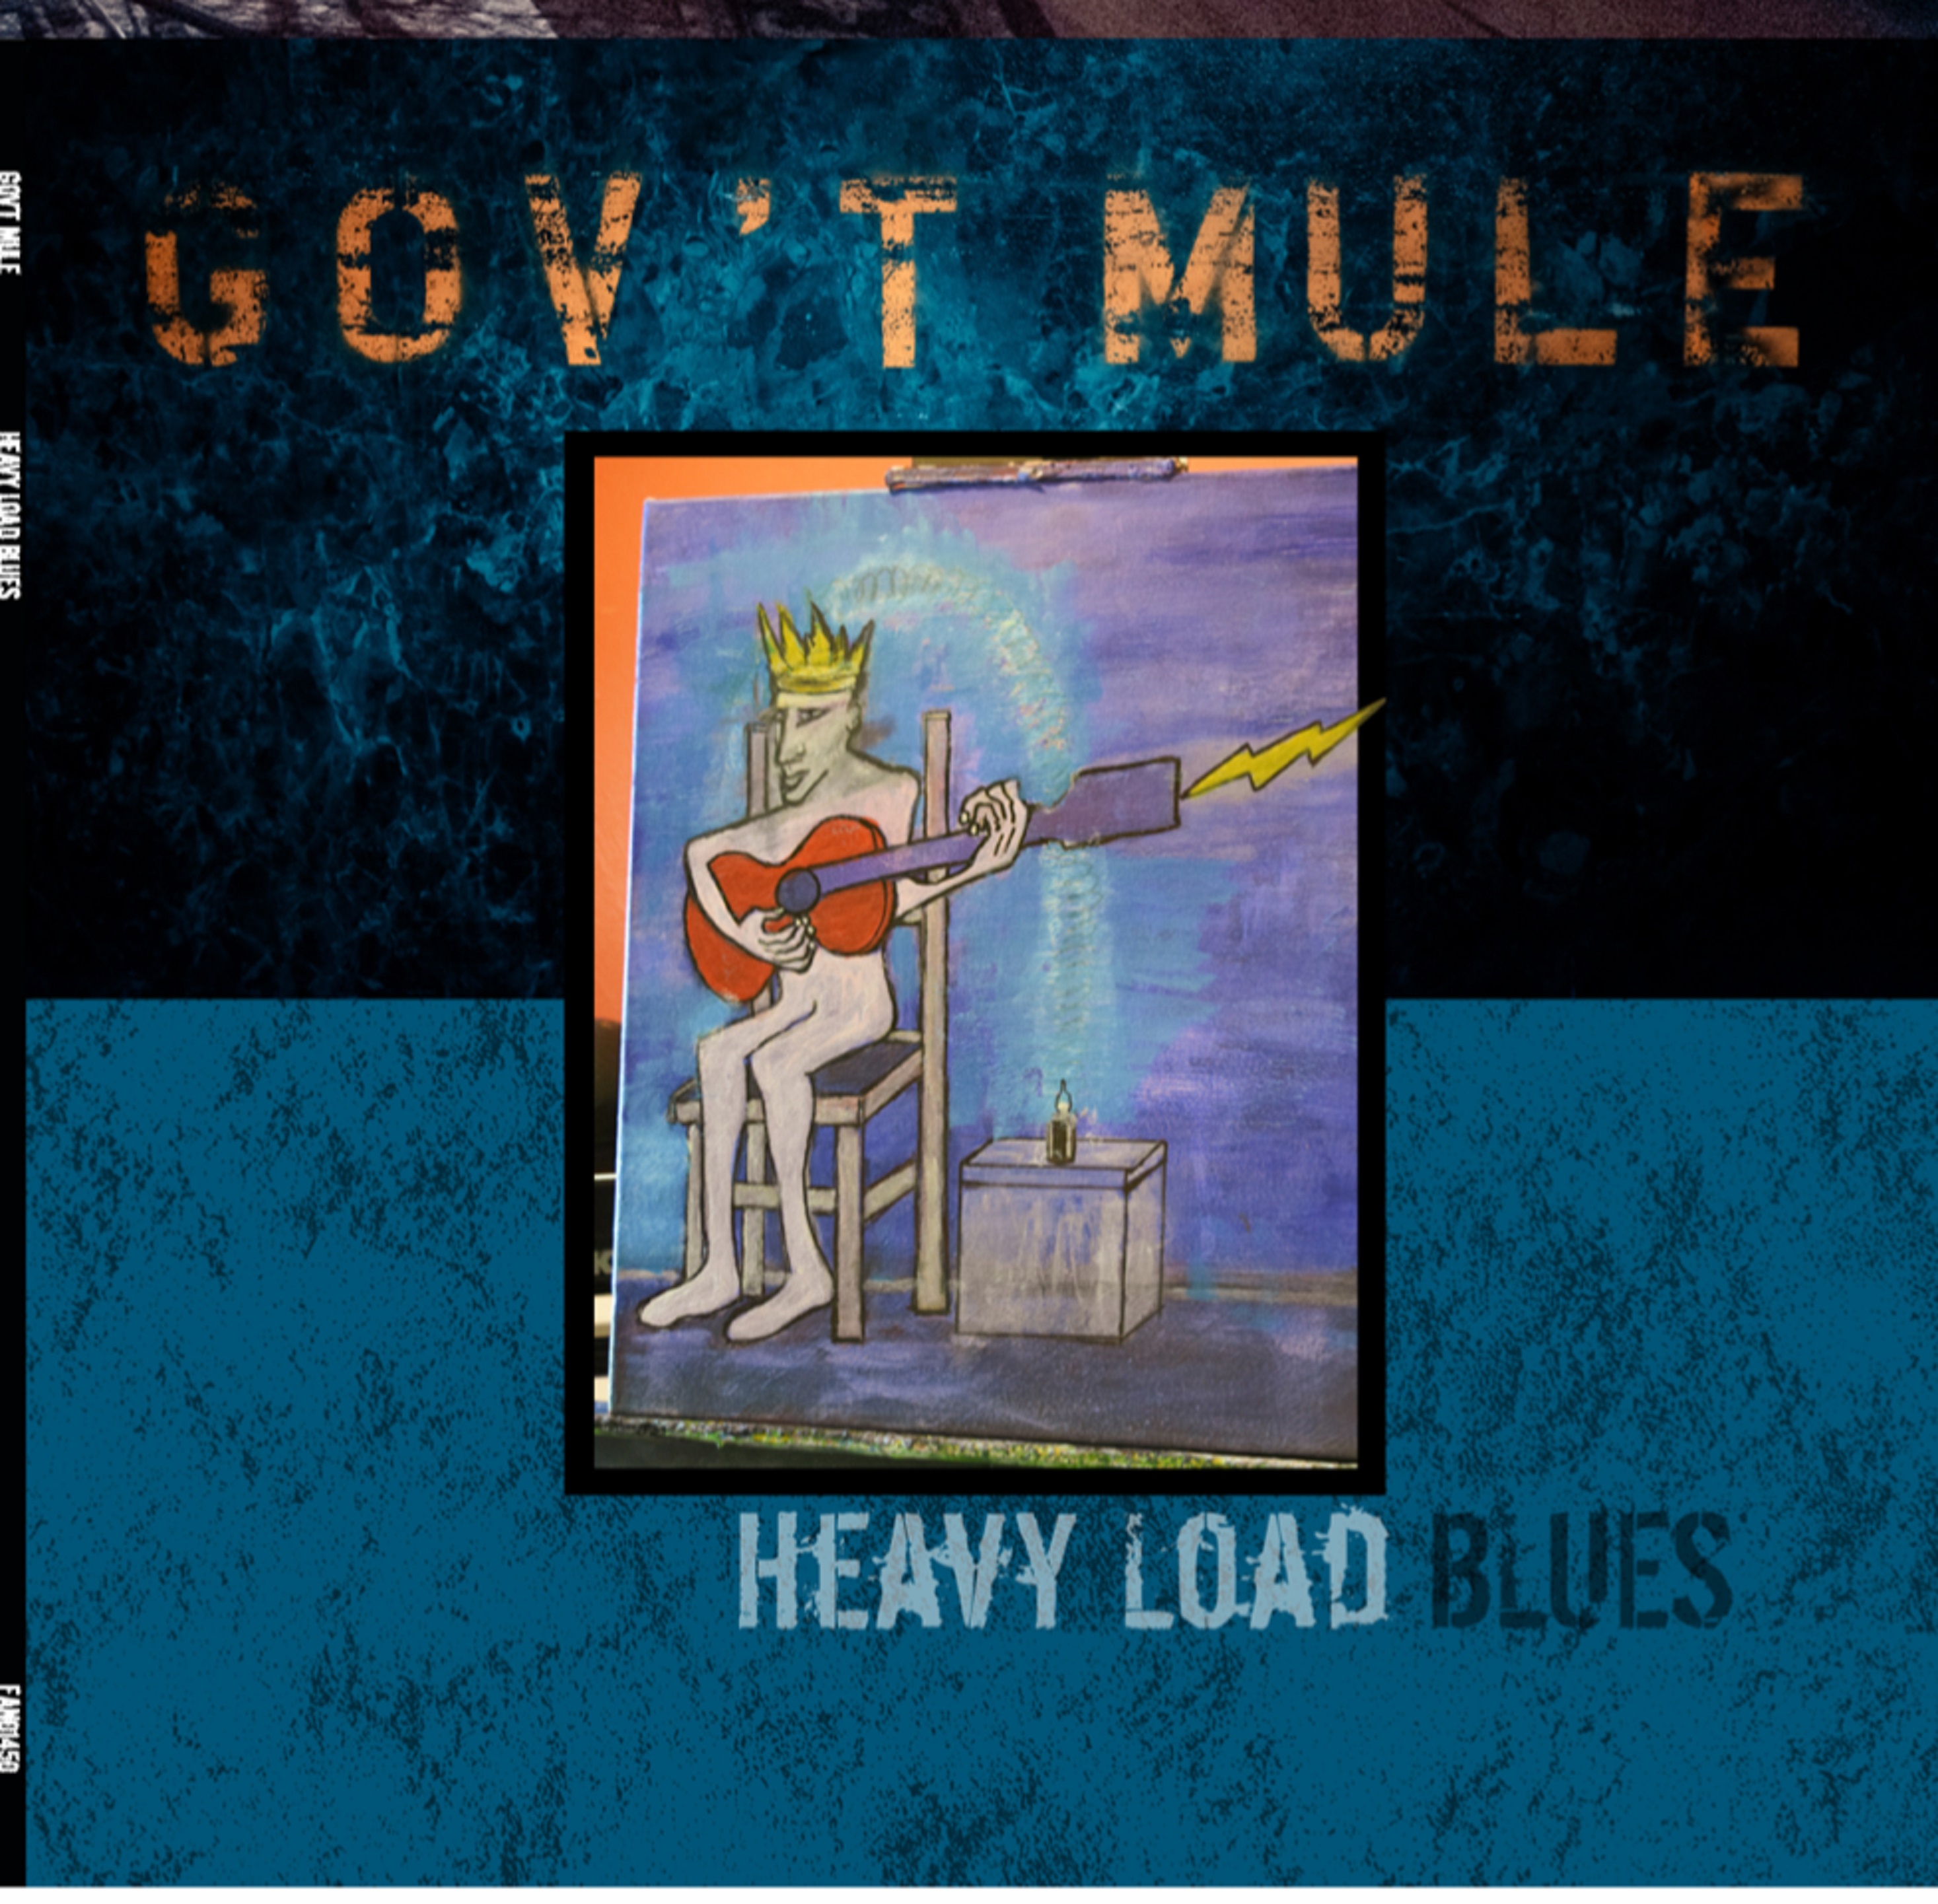 Gov’t Mule’s 'Heavy Load Blues' Debuts at #1 on the Billboard Blues Albums Chart